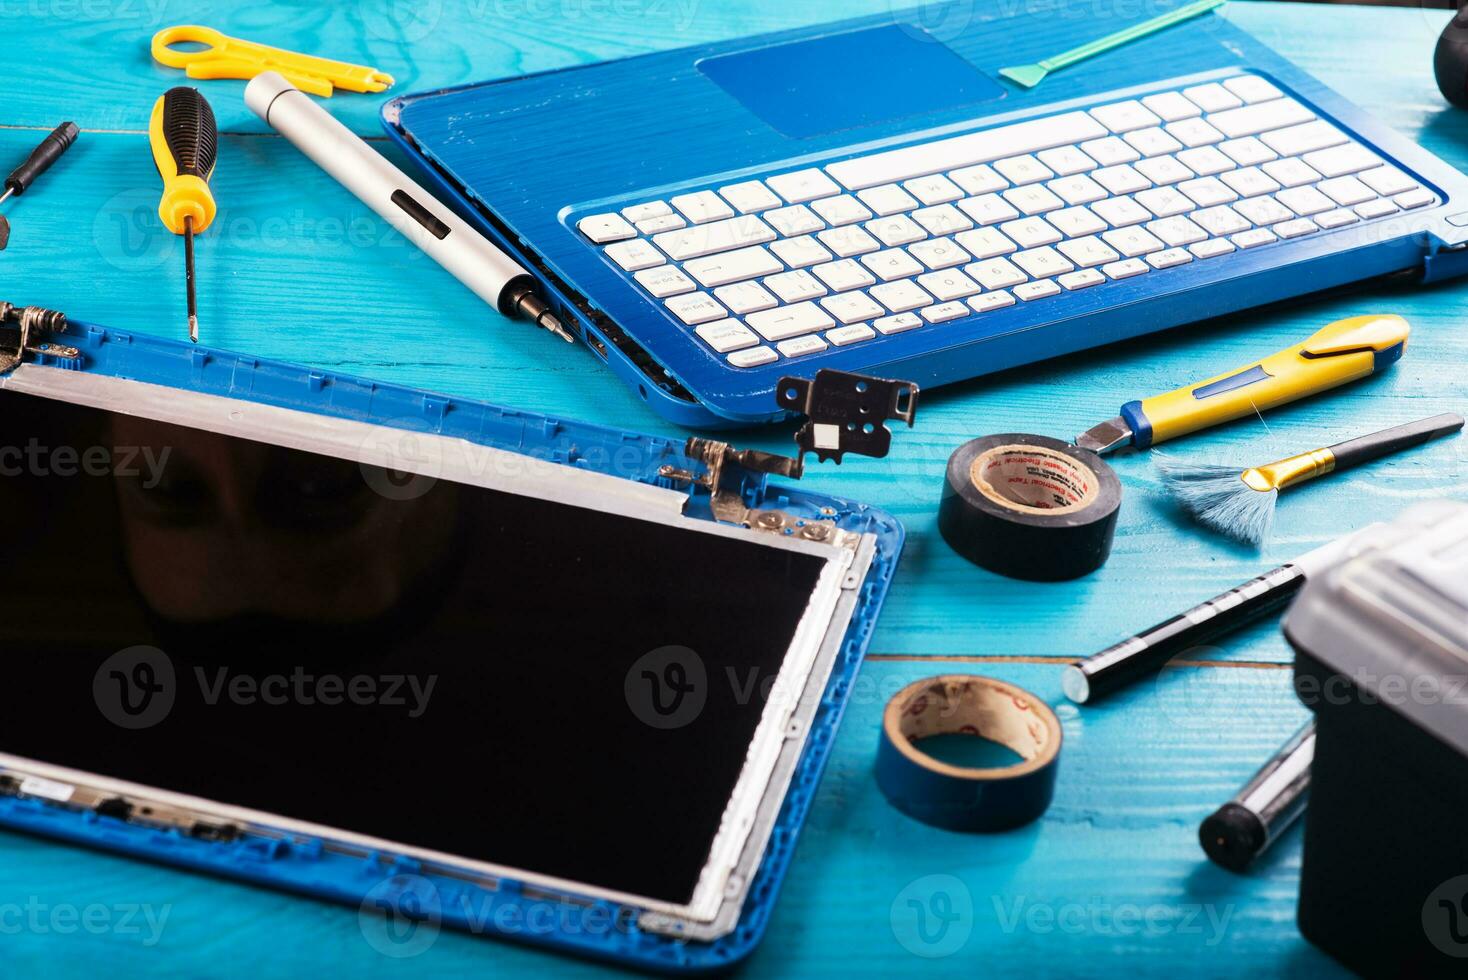 Wizard repairs laptop with tools and hands on the blue wooding table. top view photo